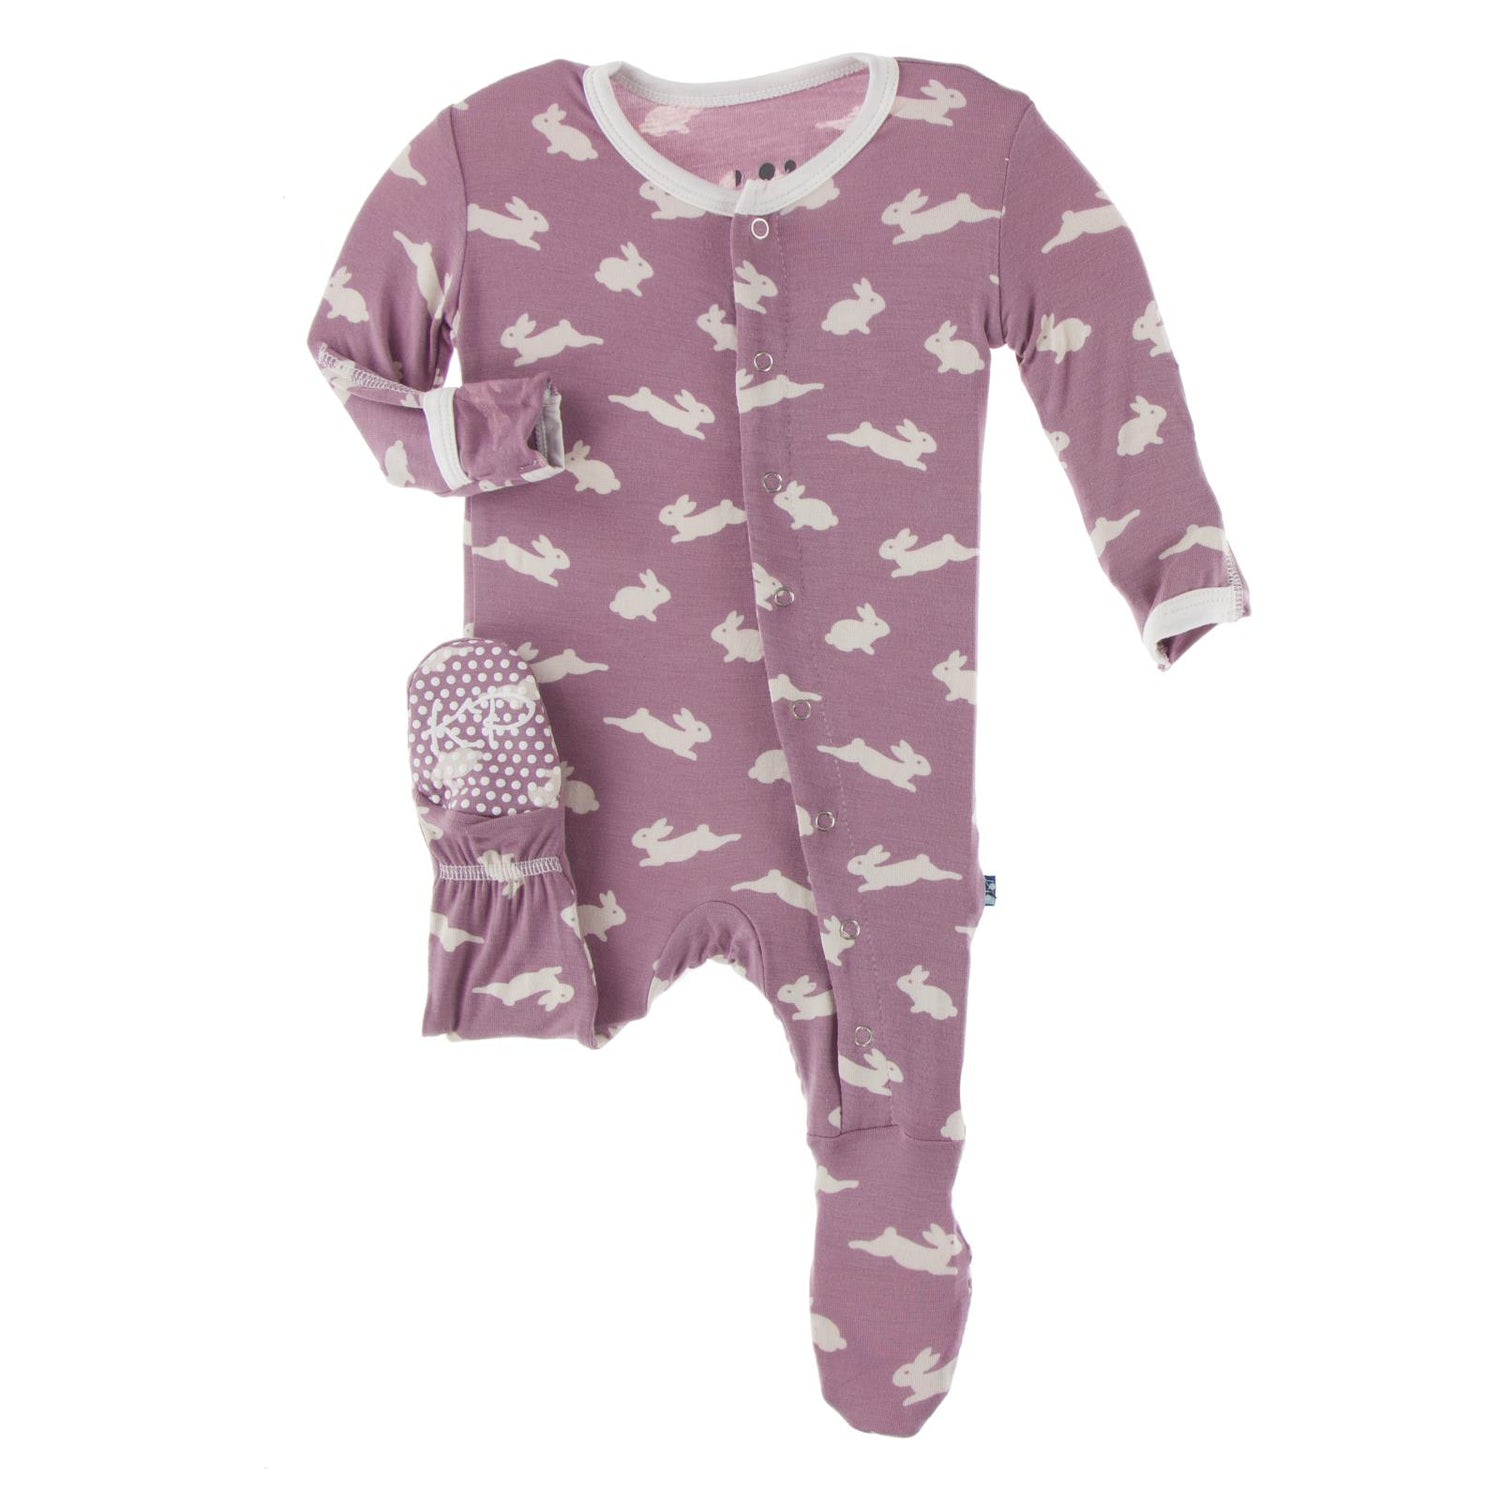 Print Footie with Snaps in Pegasus Bunny